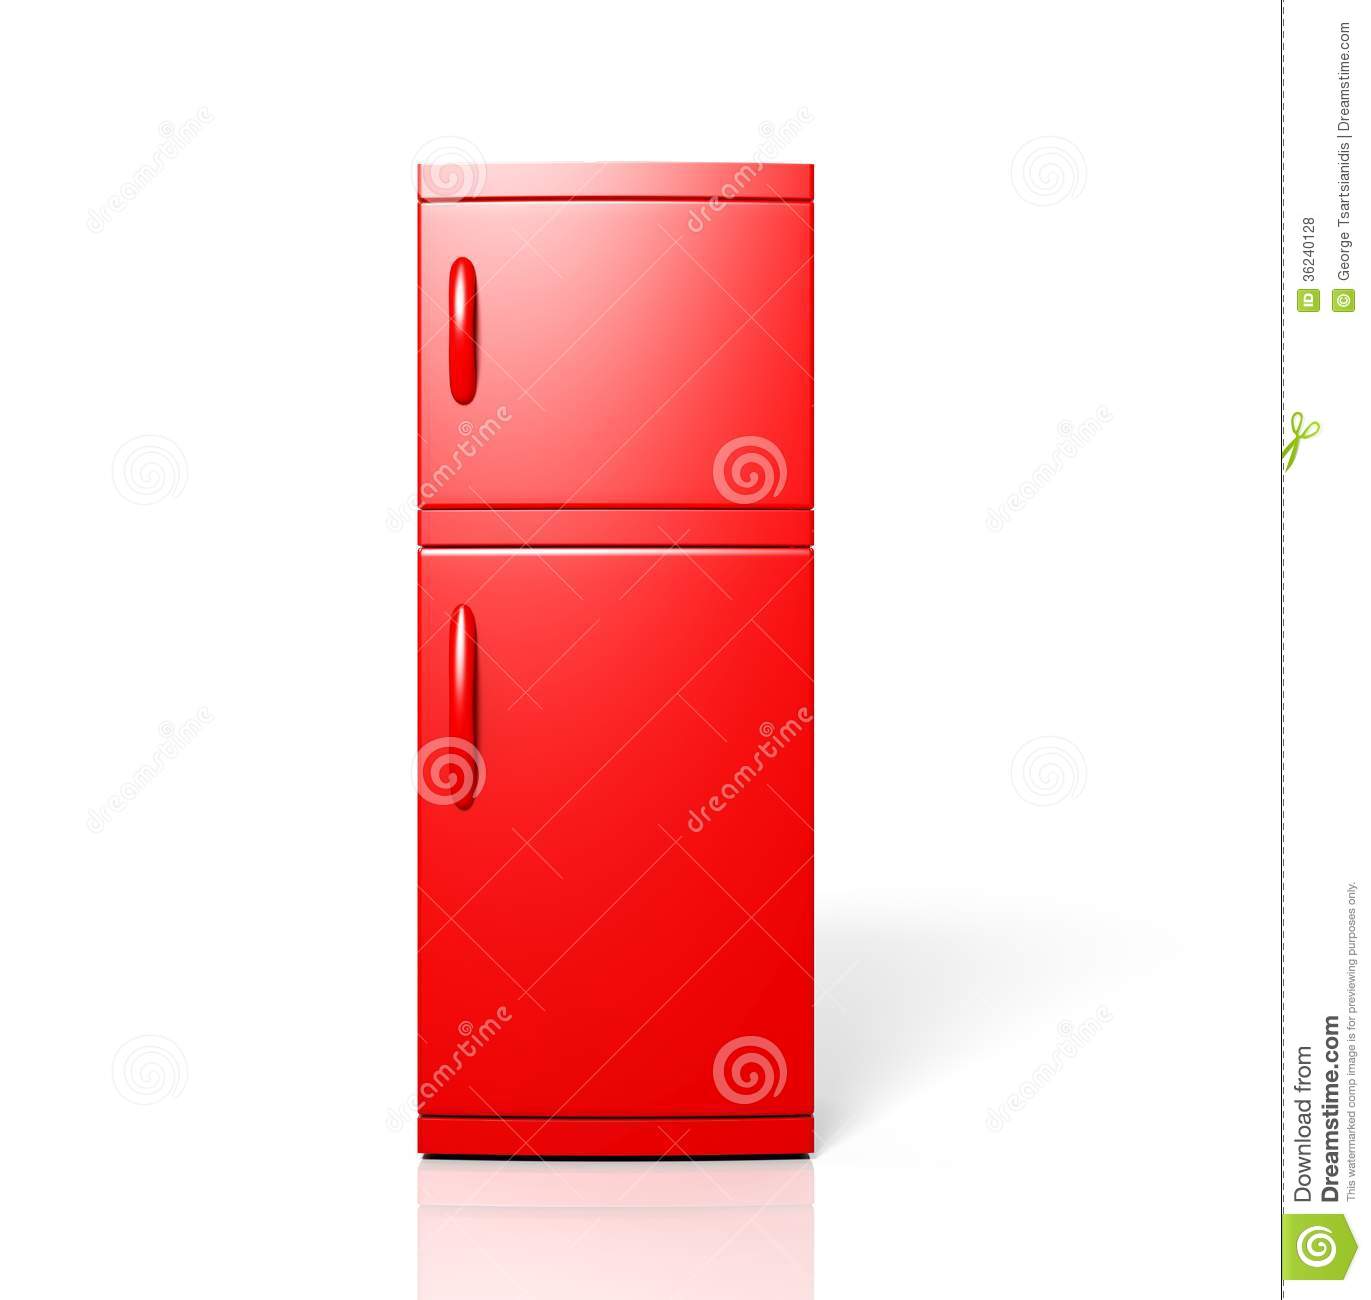 refrigerator clipart red